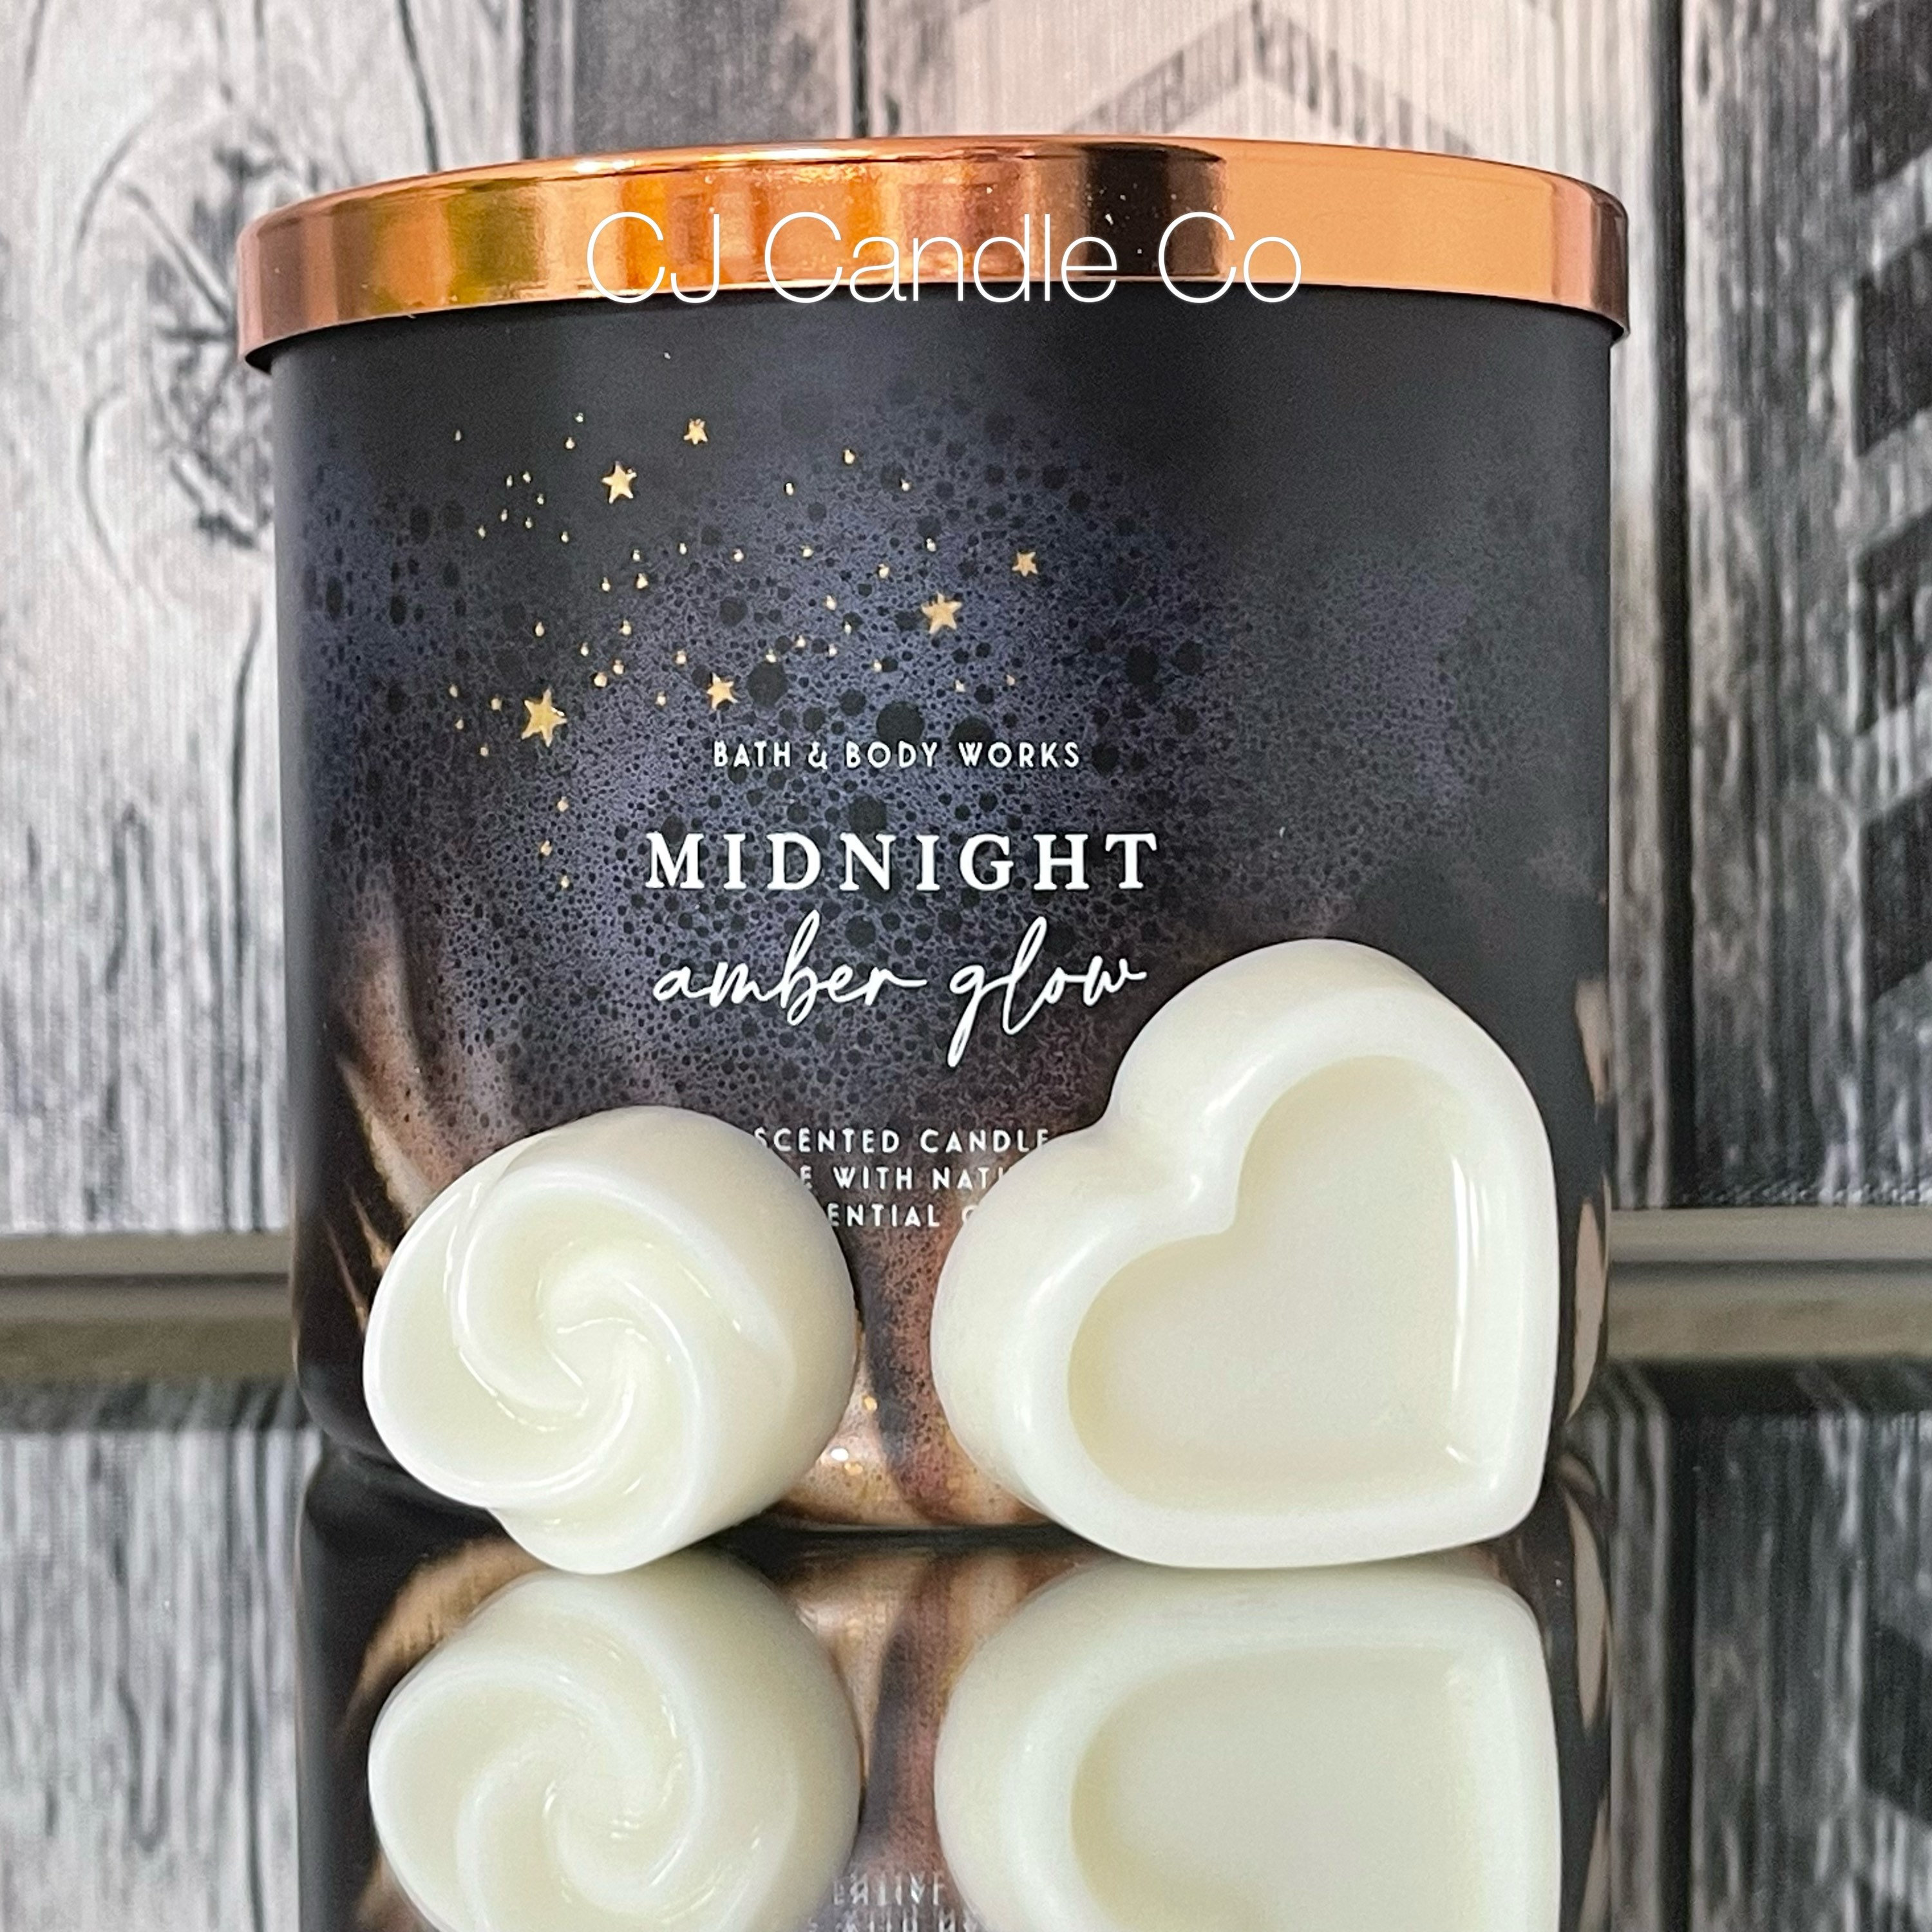 Midnight Amber Glow Bath & Body Works Candle Wax Melts BBW Wax Melts  Perfect Gift for Mom, Sister, Best Friend, Valentines 